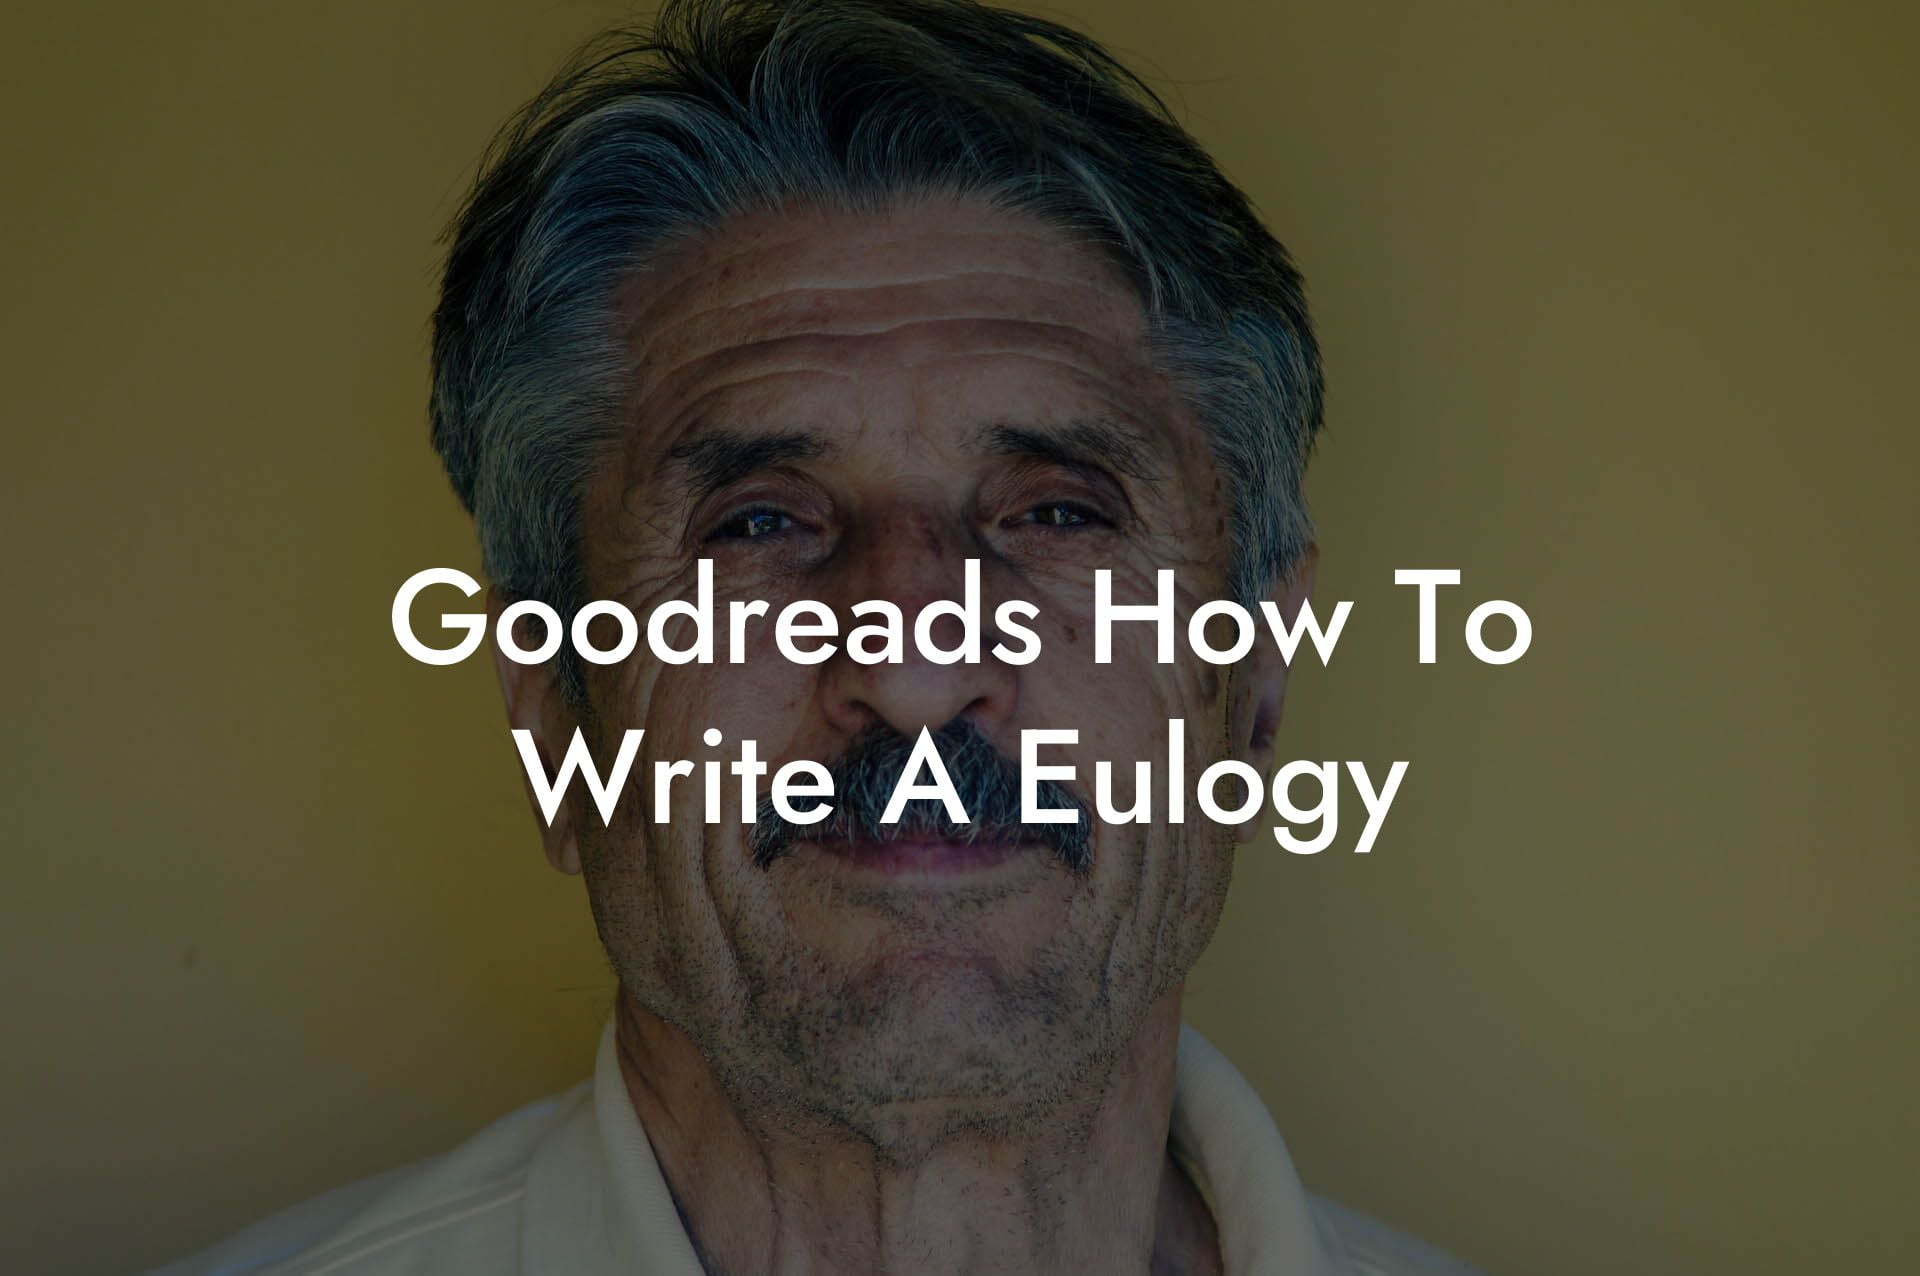 Goodreads How To Write A Eulogy